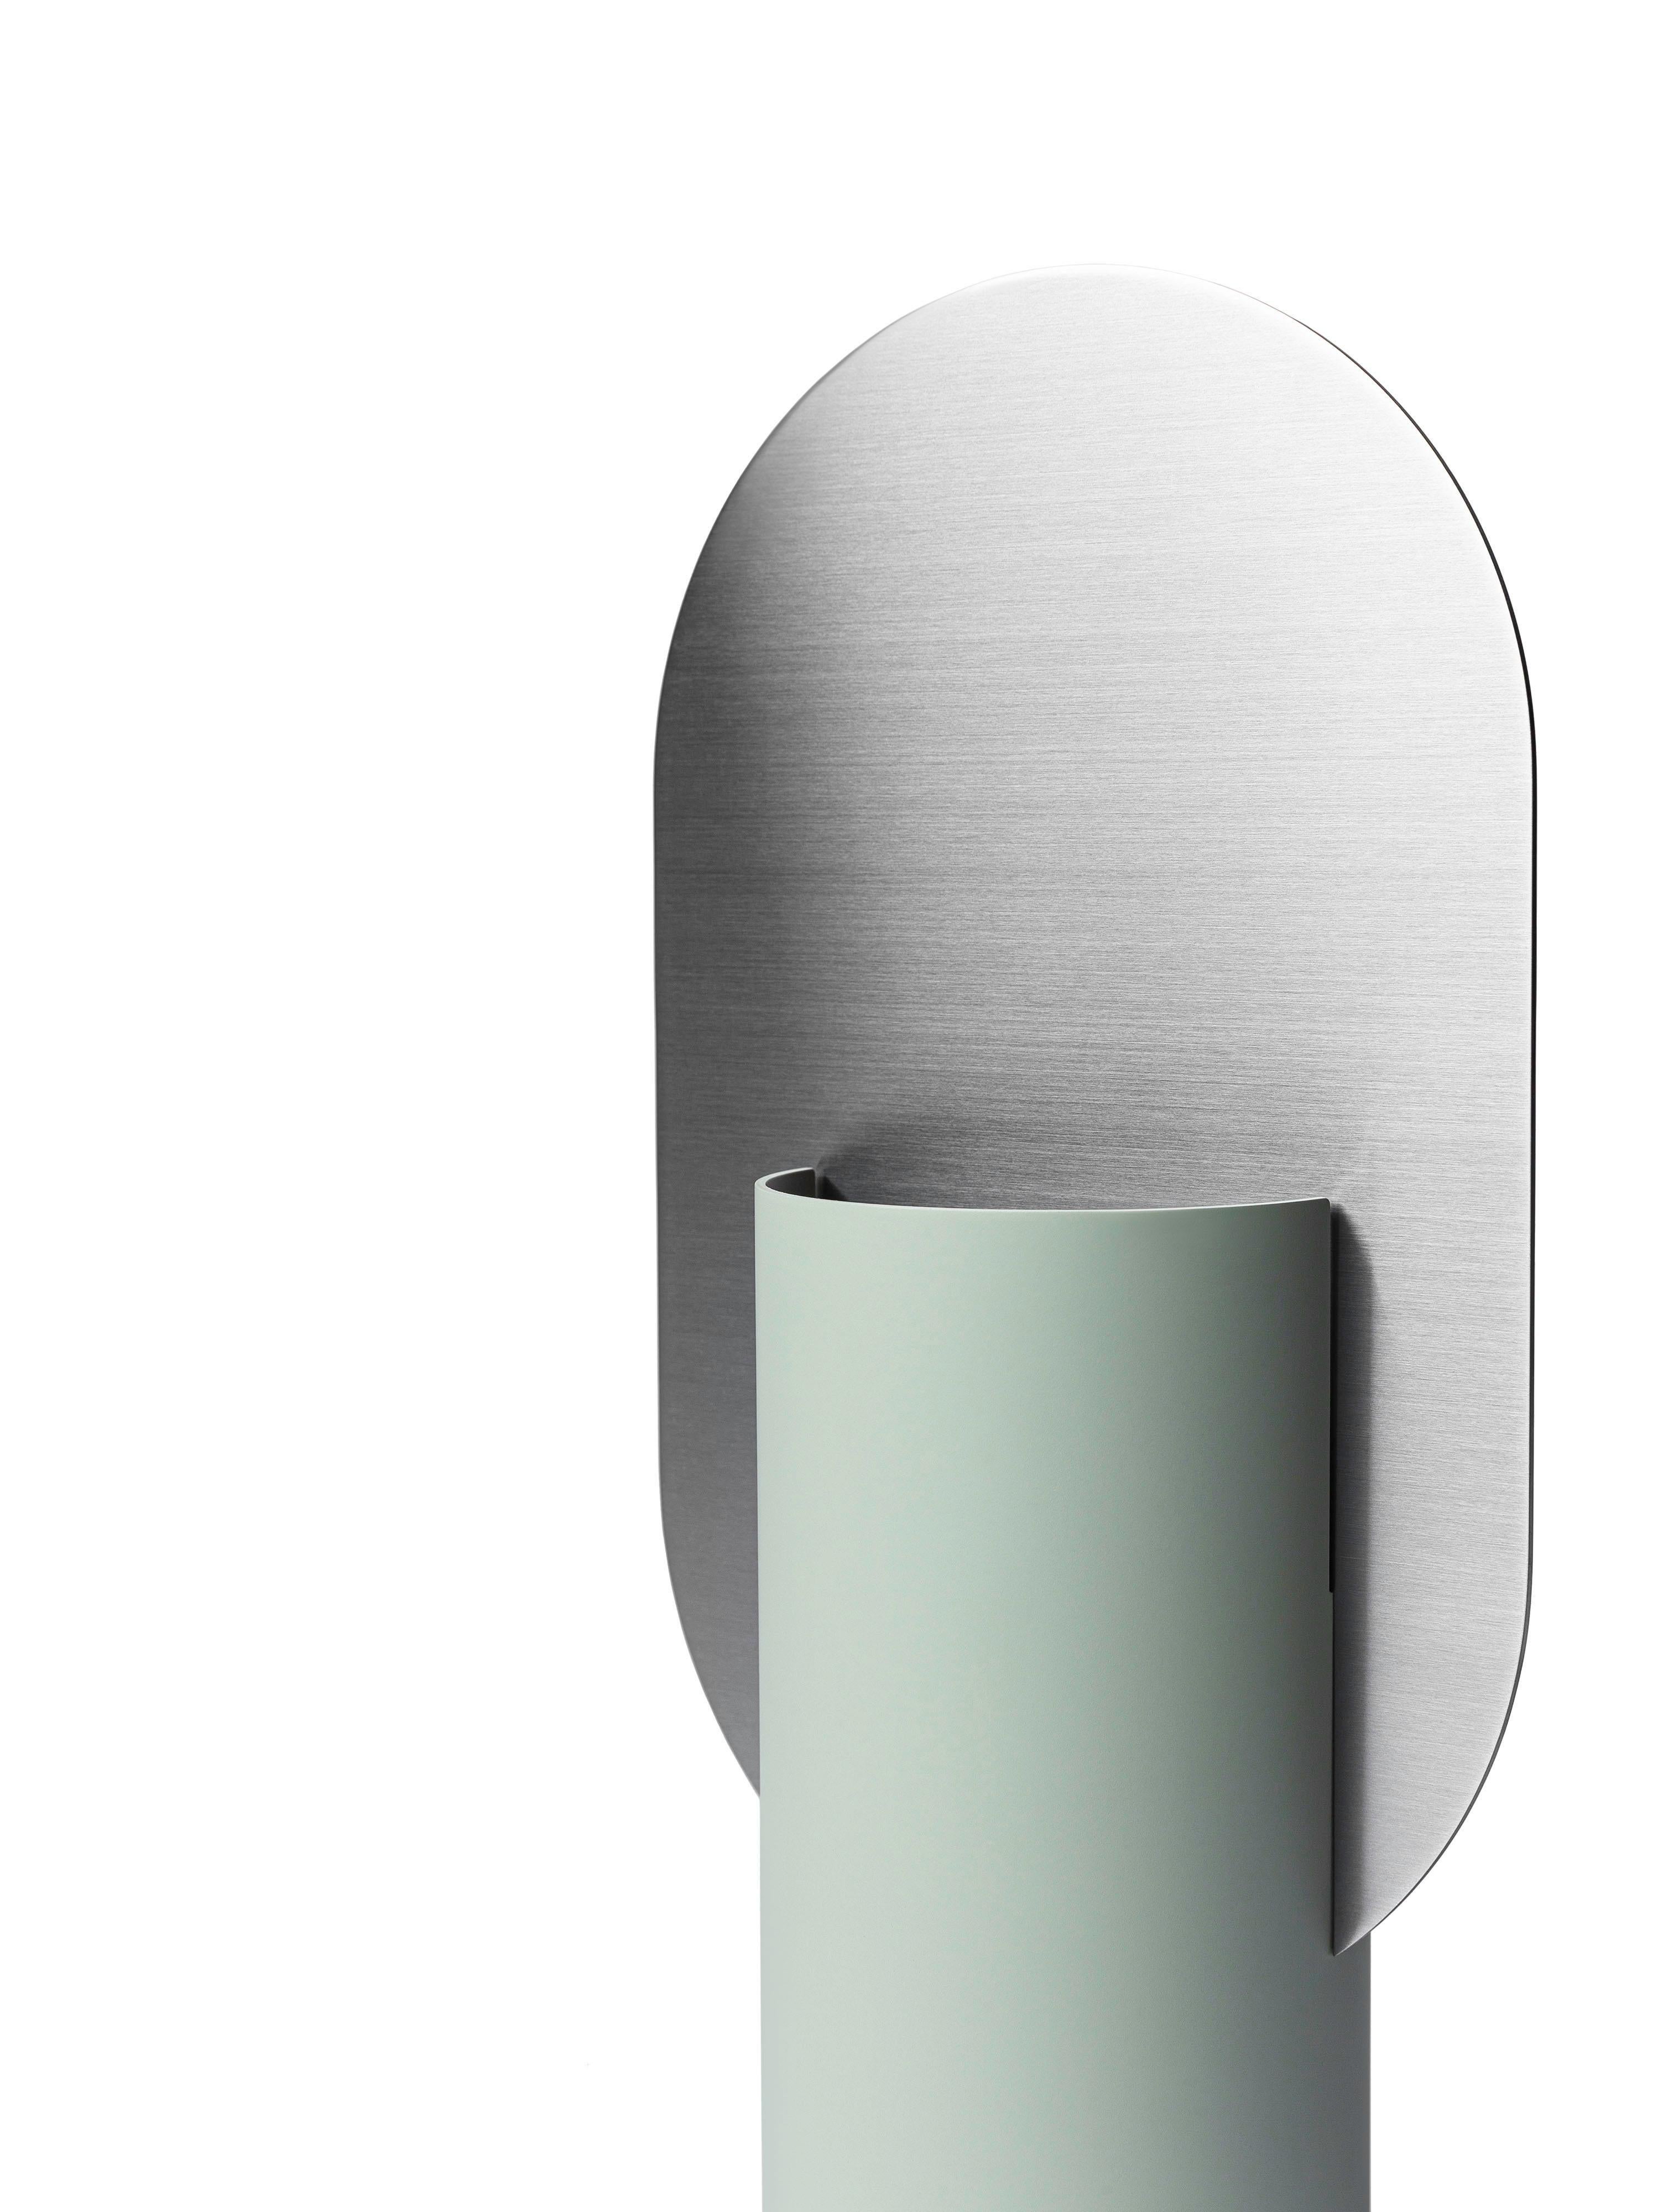 Organic Modern Contemmporary Vase 'Genke CS8' by Noom, Brushed Stainless Steel For Sale